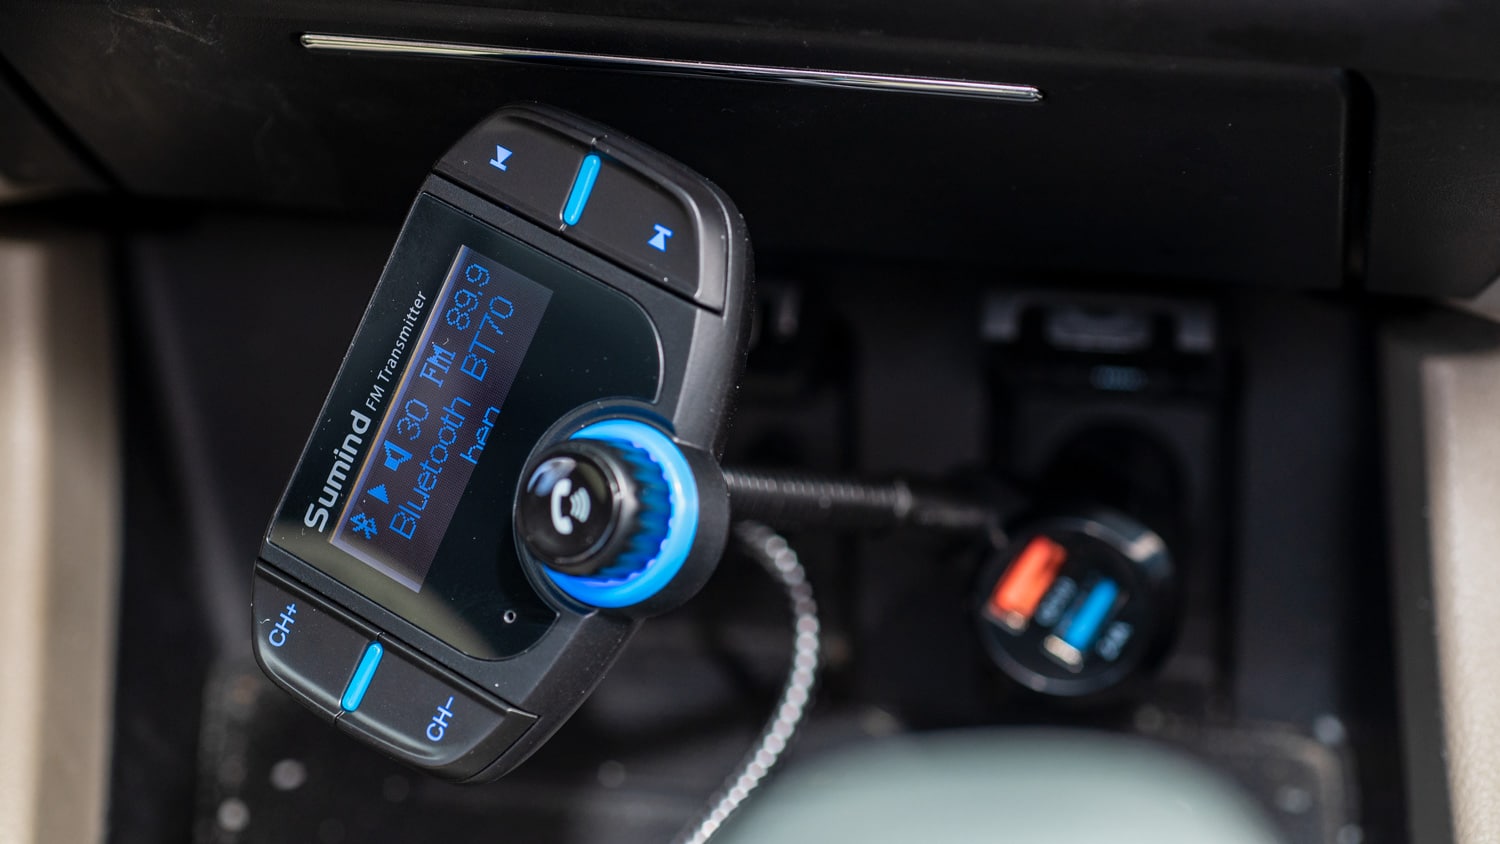 Auto Drive Bluetooth FM Transmitter: Connecting Devices Hassle-Free